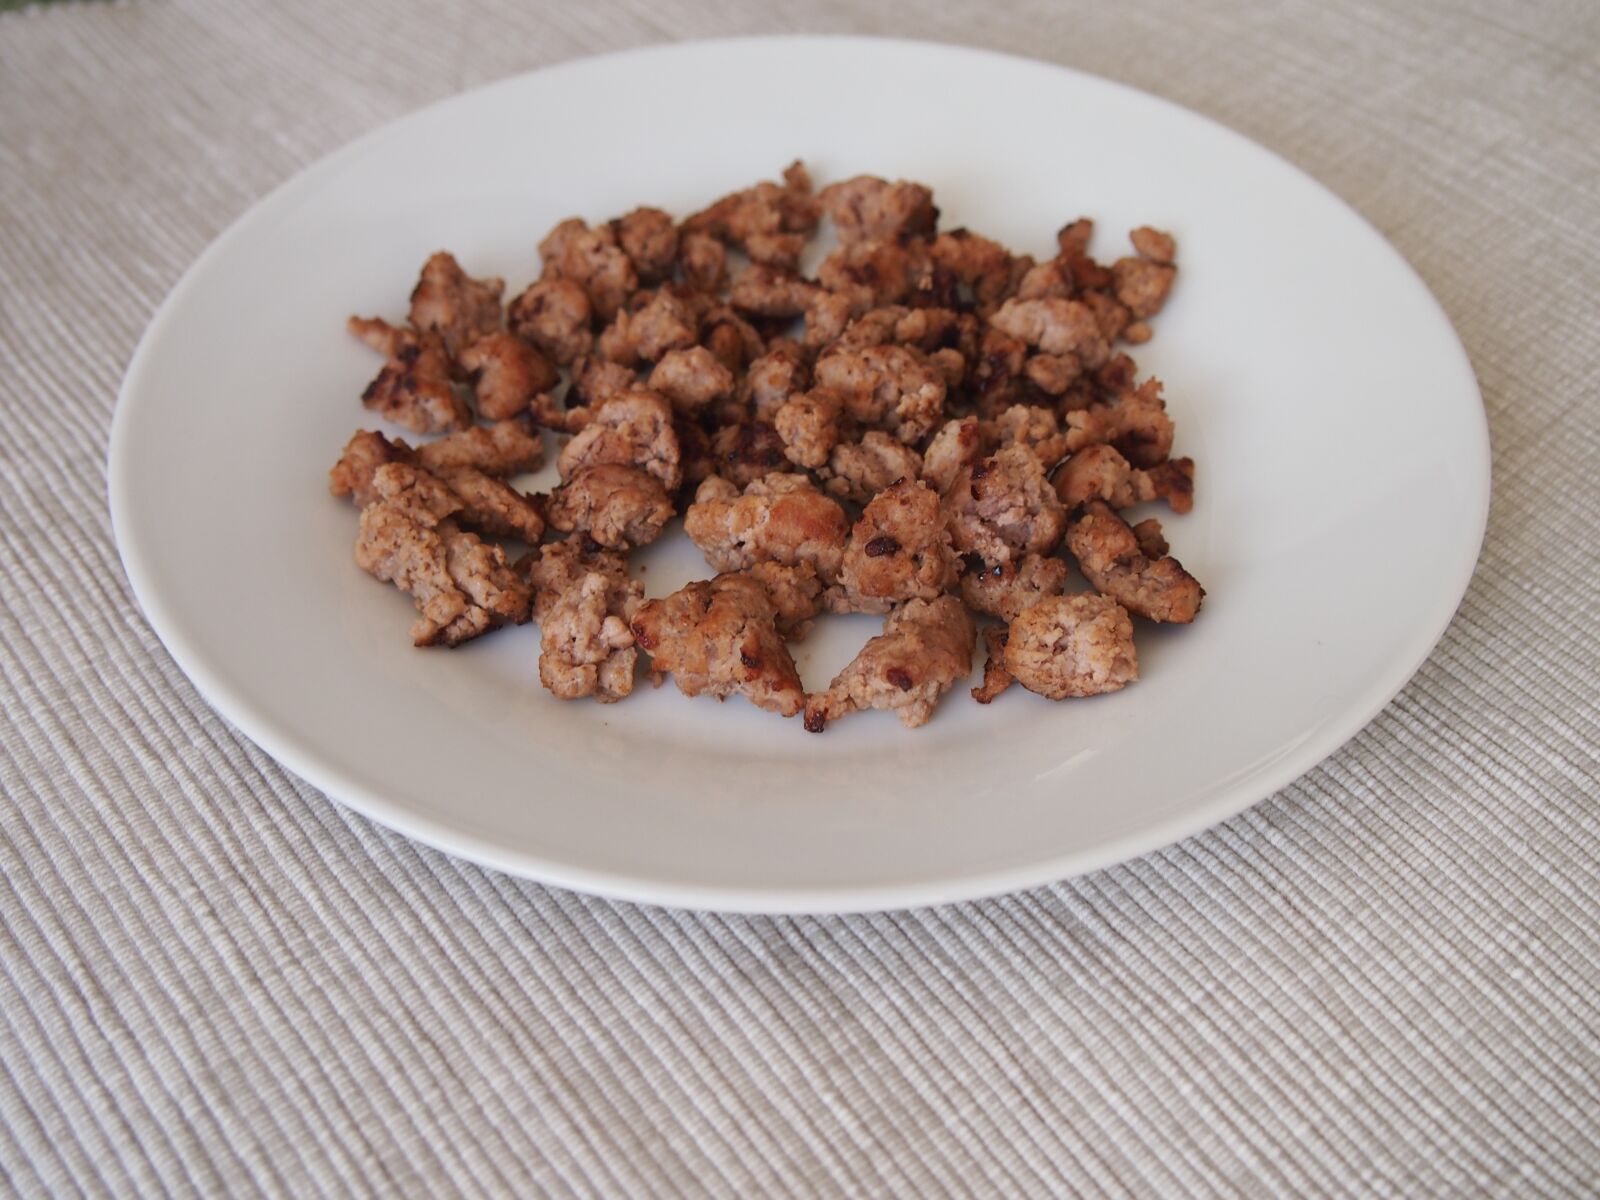 Olympus PEN E-PL3 sample photo. Minced meat, hack, eat photography